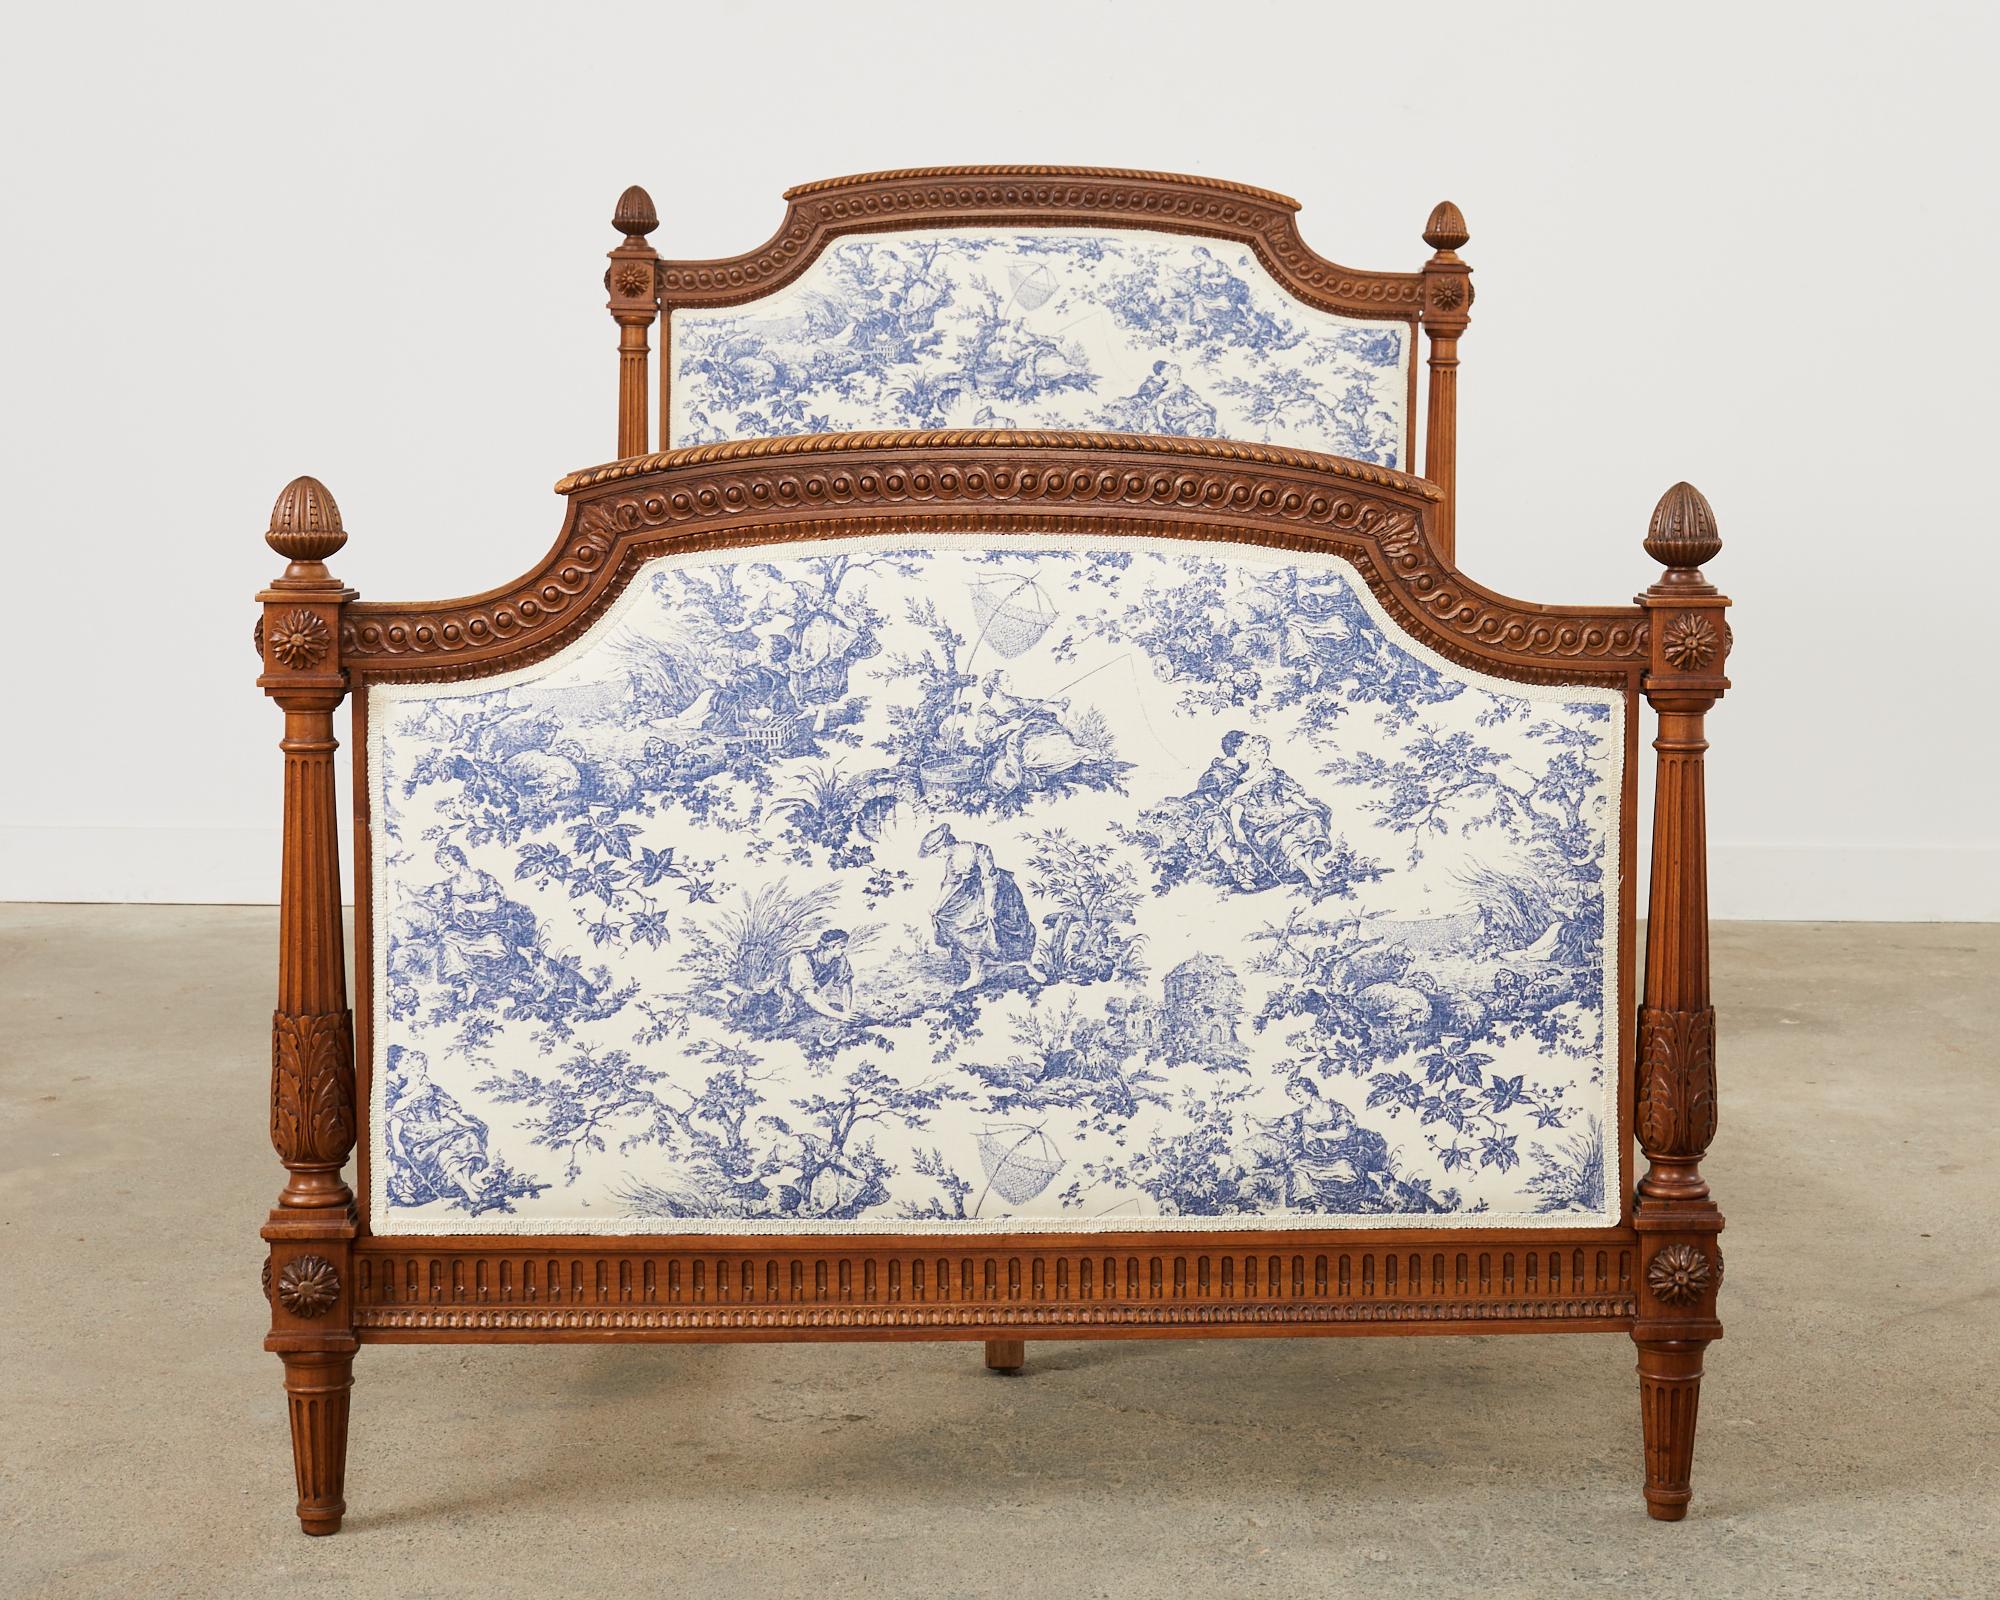 Pair of Louis XVI Style Walnut Carved Beds with Toile  In Good Condition For Sale In Rio Vista, CA